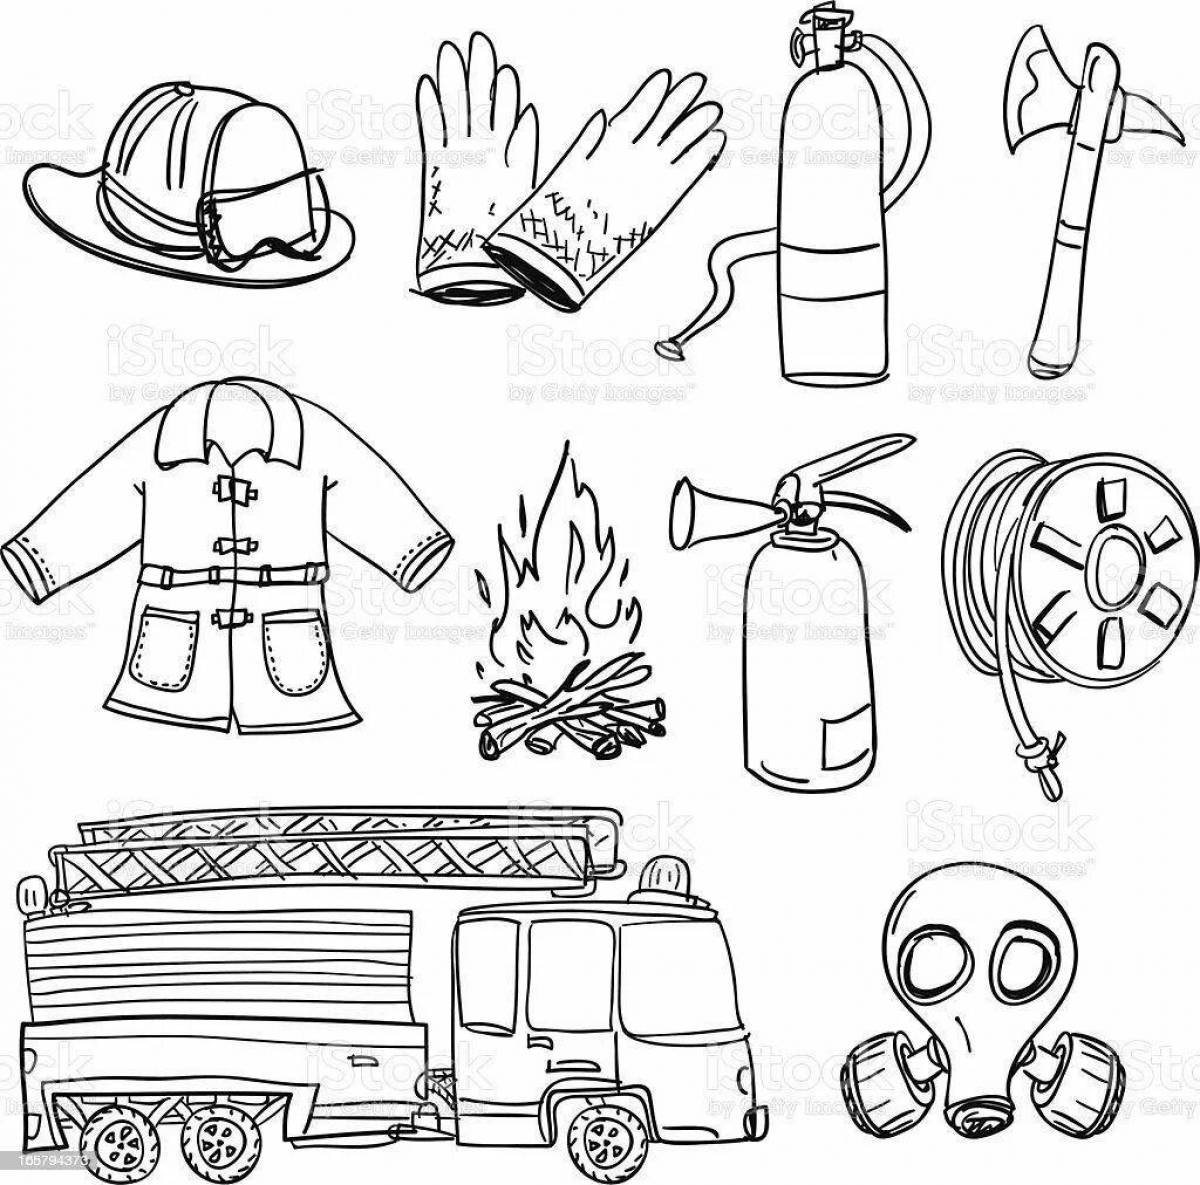 Amazing fire shield coloring page for kids